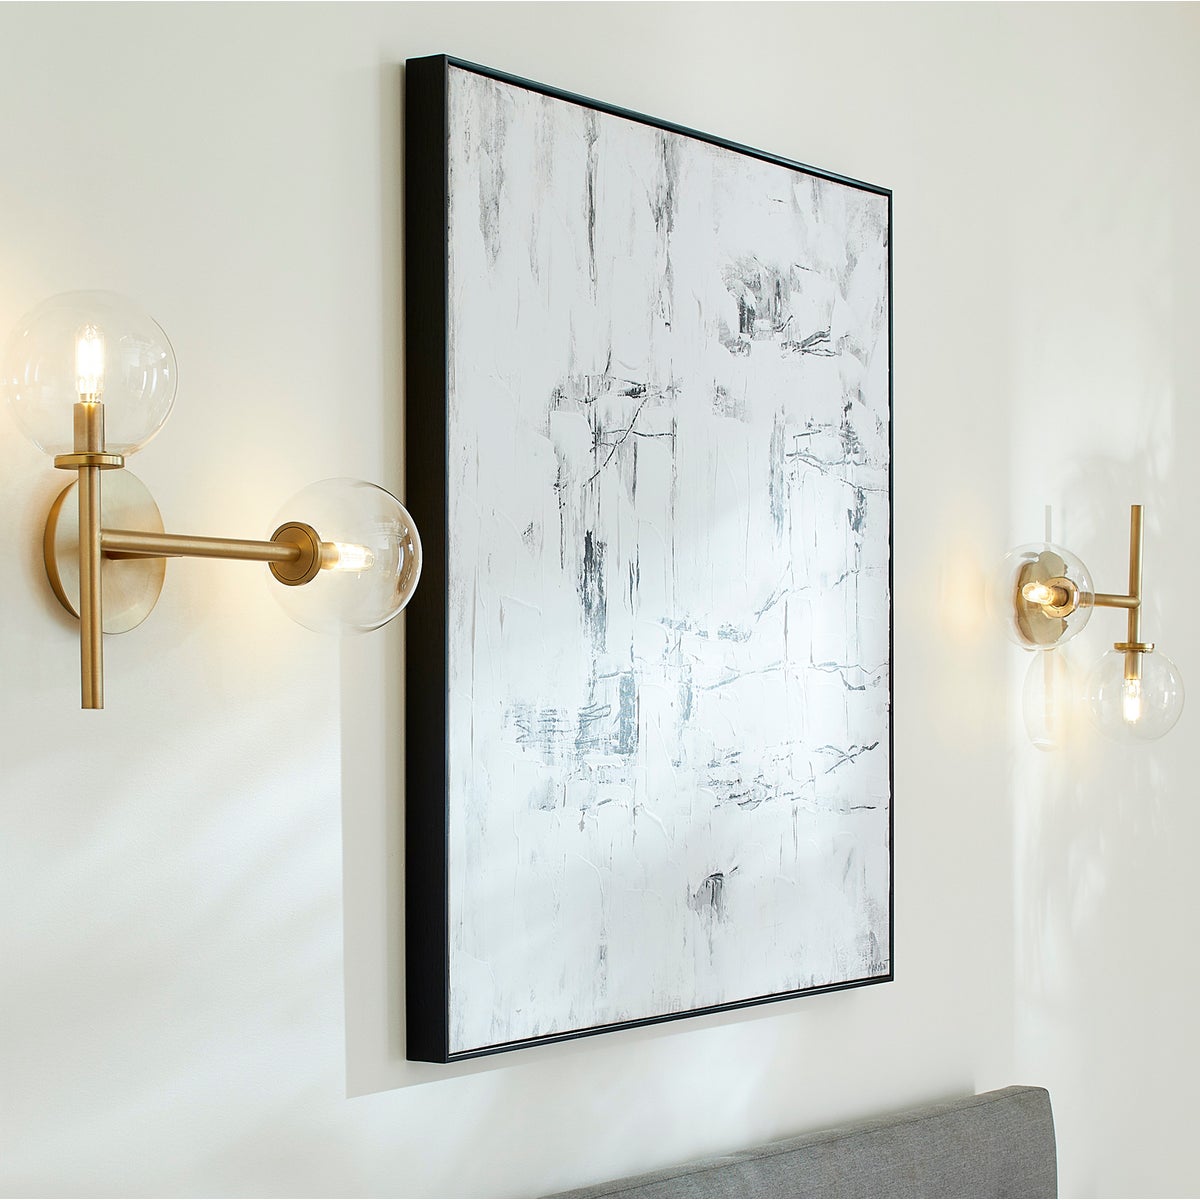 Sputnik Wall Sconce with clear glass domes and aged brass frames, adding mid-century modern appeal. Enhance your environment with this brilliant mid century design.